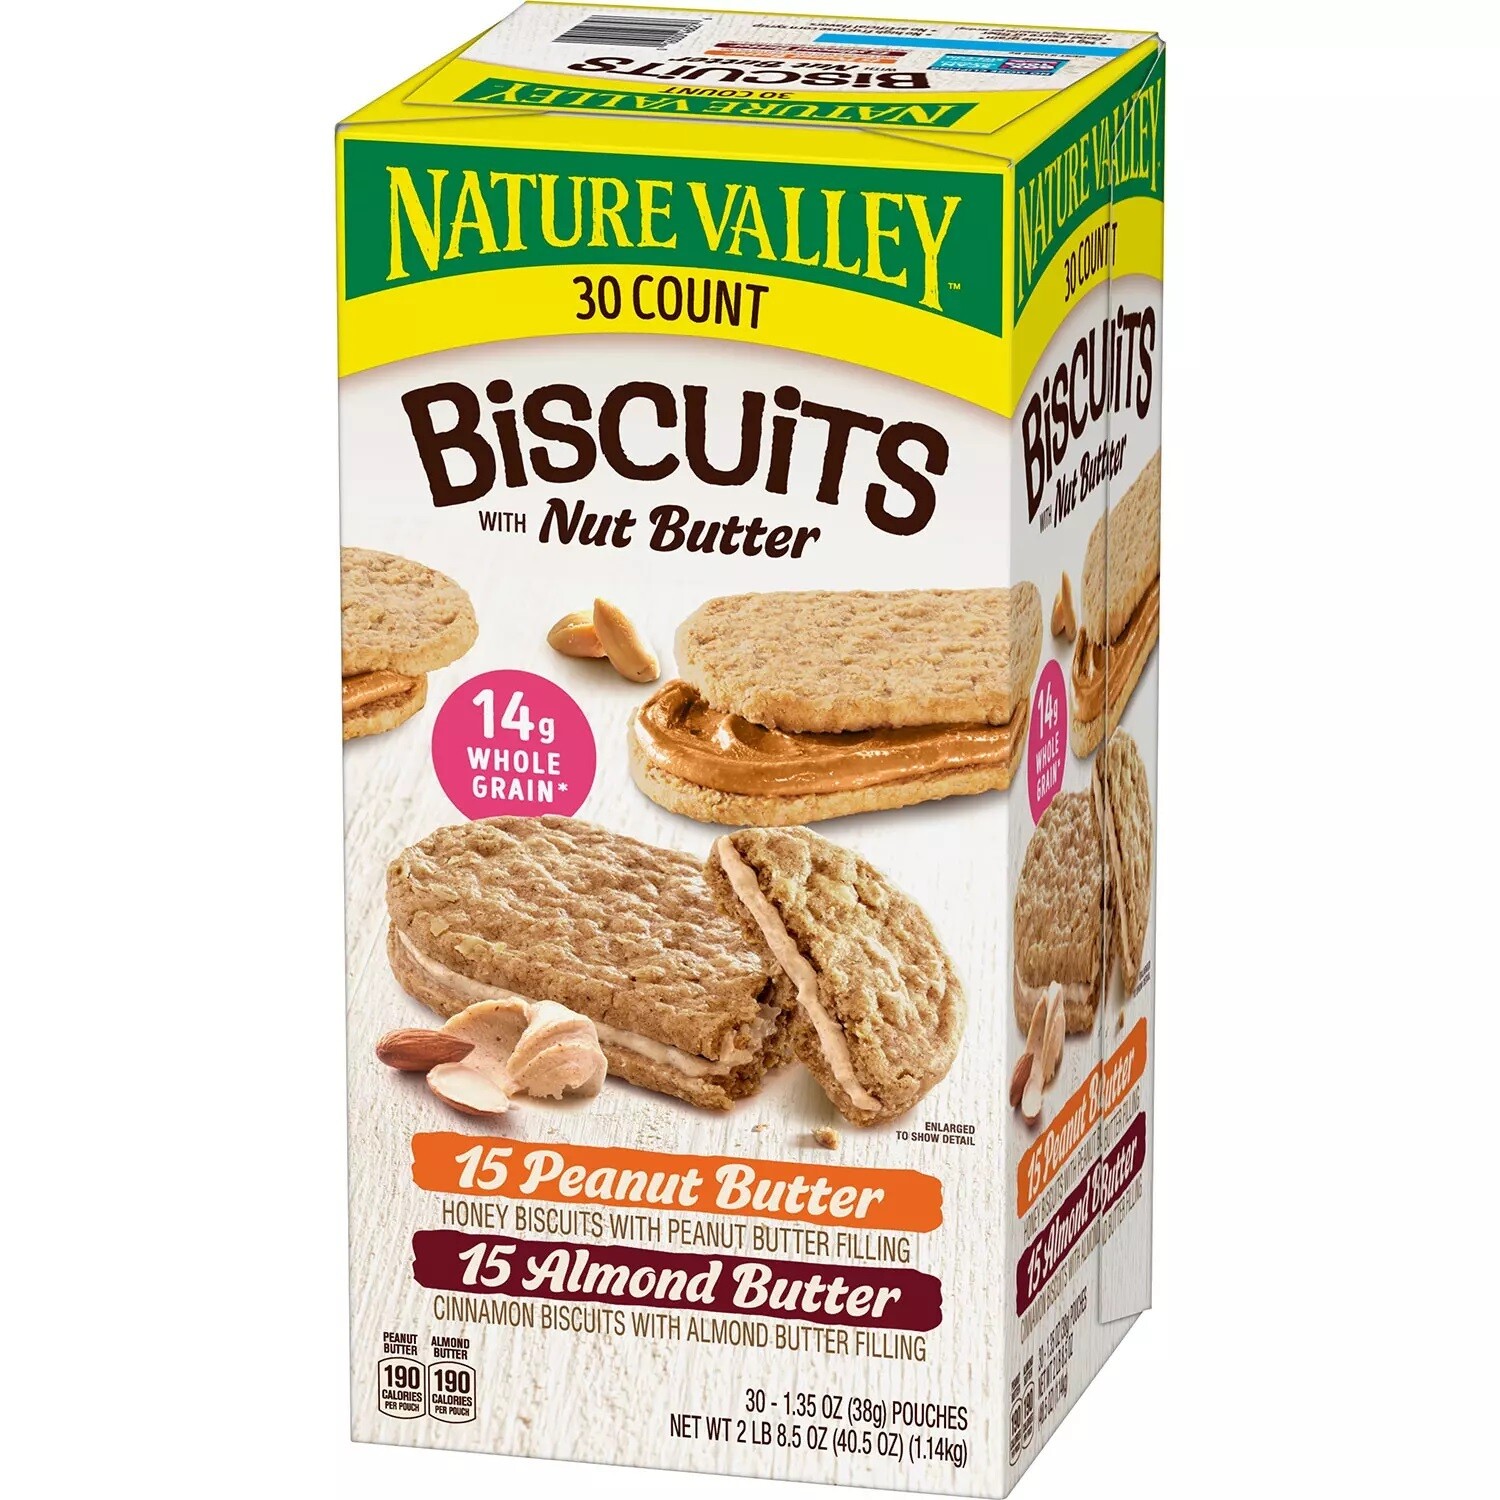 Nature Valley Biscuits with Nut Butter 30ct